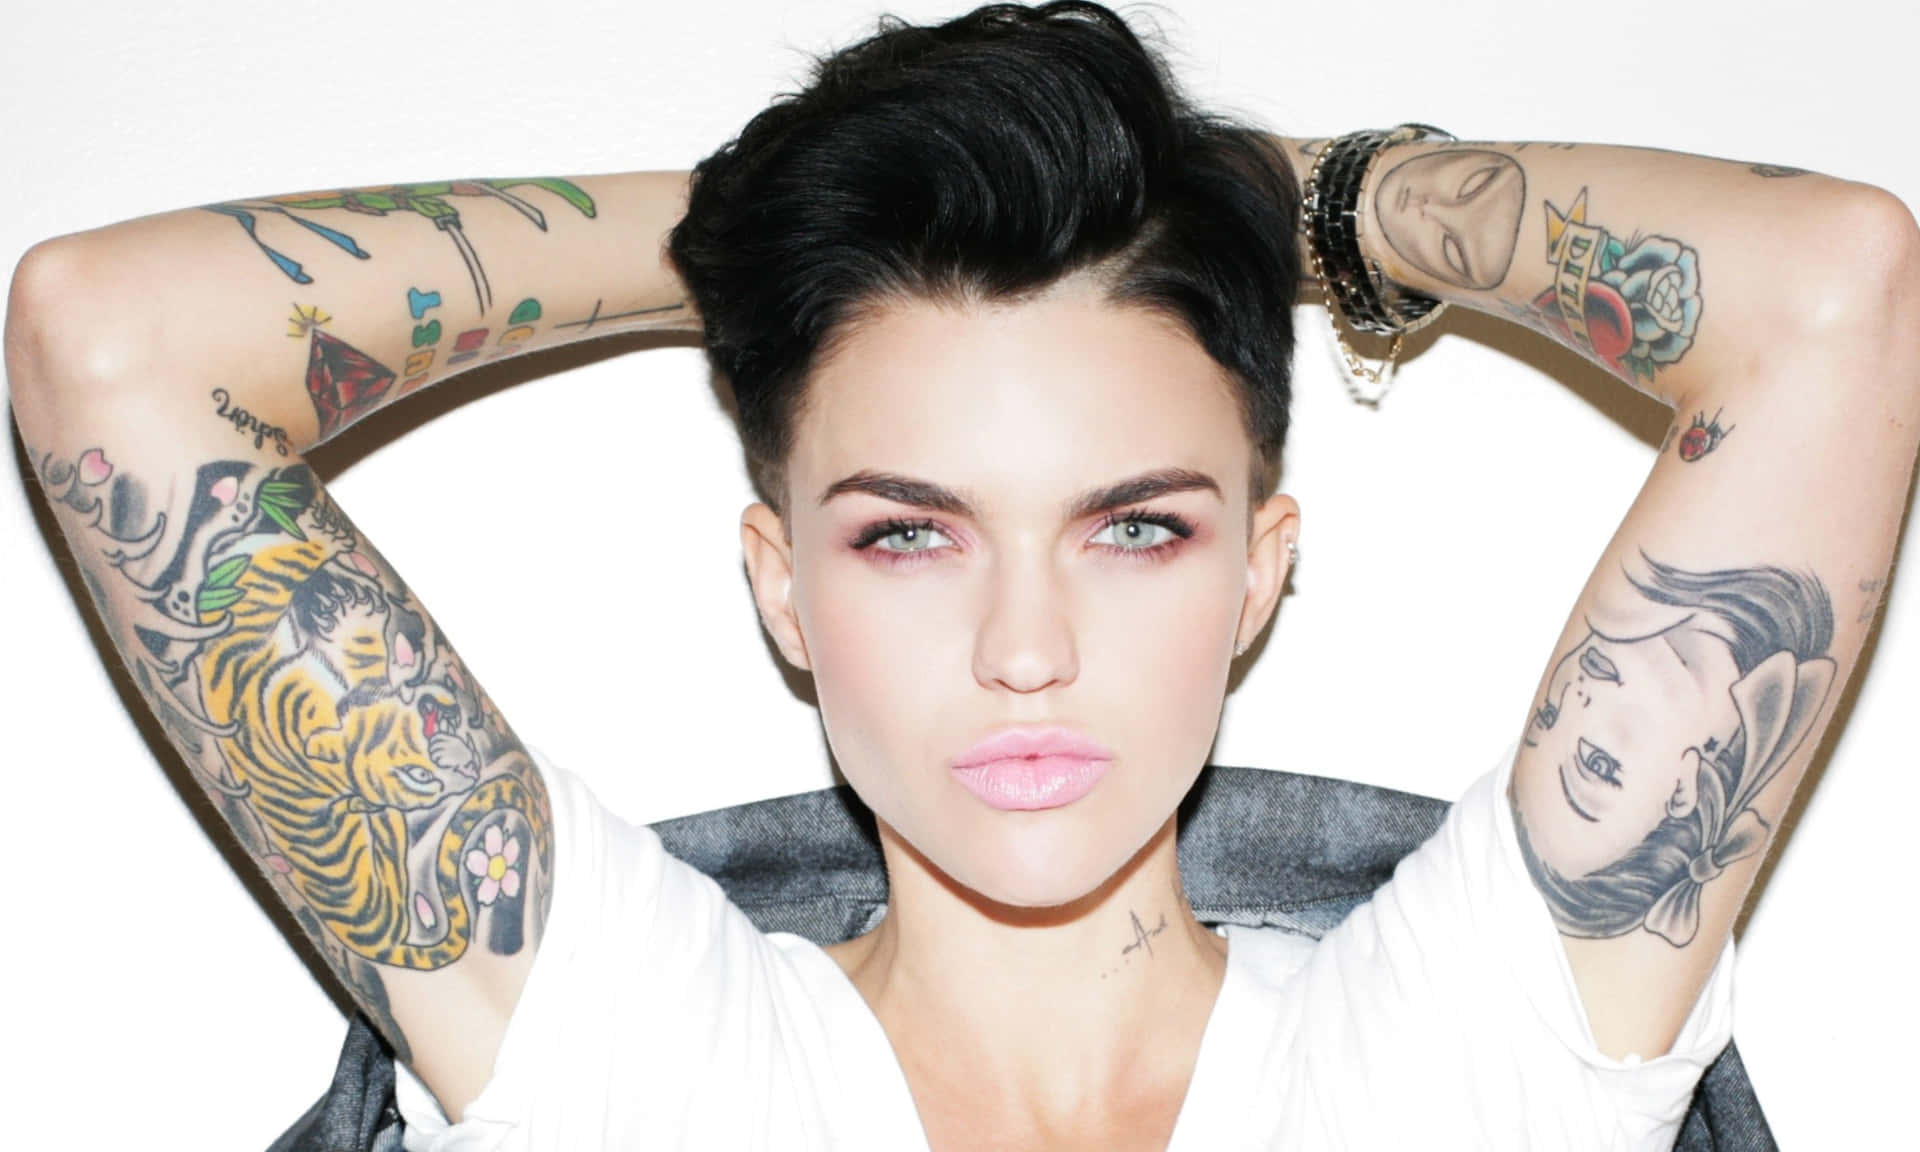 Rubyrose Tatuerad På Halsen. (this Is A Literal Translation And May Not Make Sense In Swedish Language And Culture. It Is Recommended To Use A More Cultural Appropriate Translation In Context Of Computer Or Mobile Wallpaper.) Wallpaper